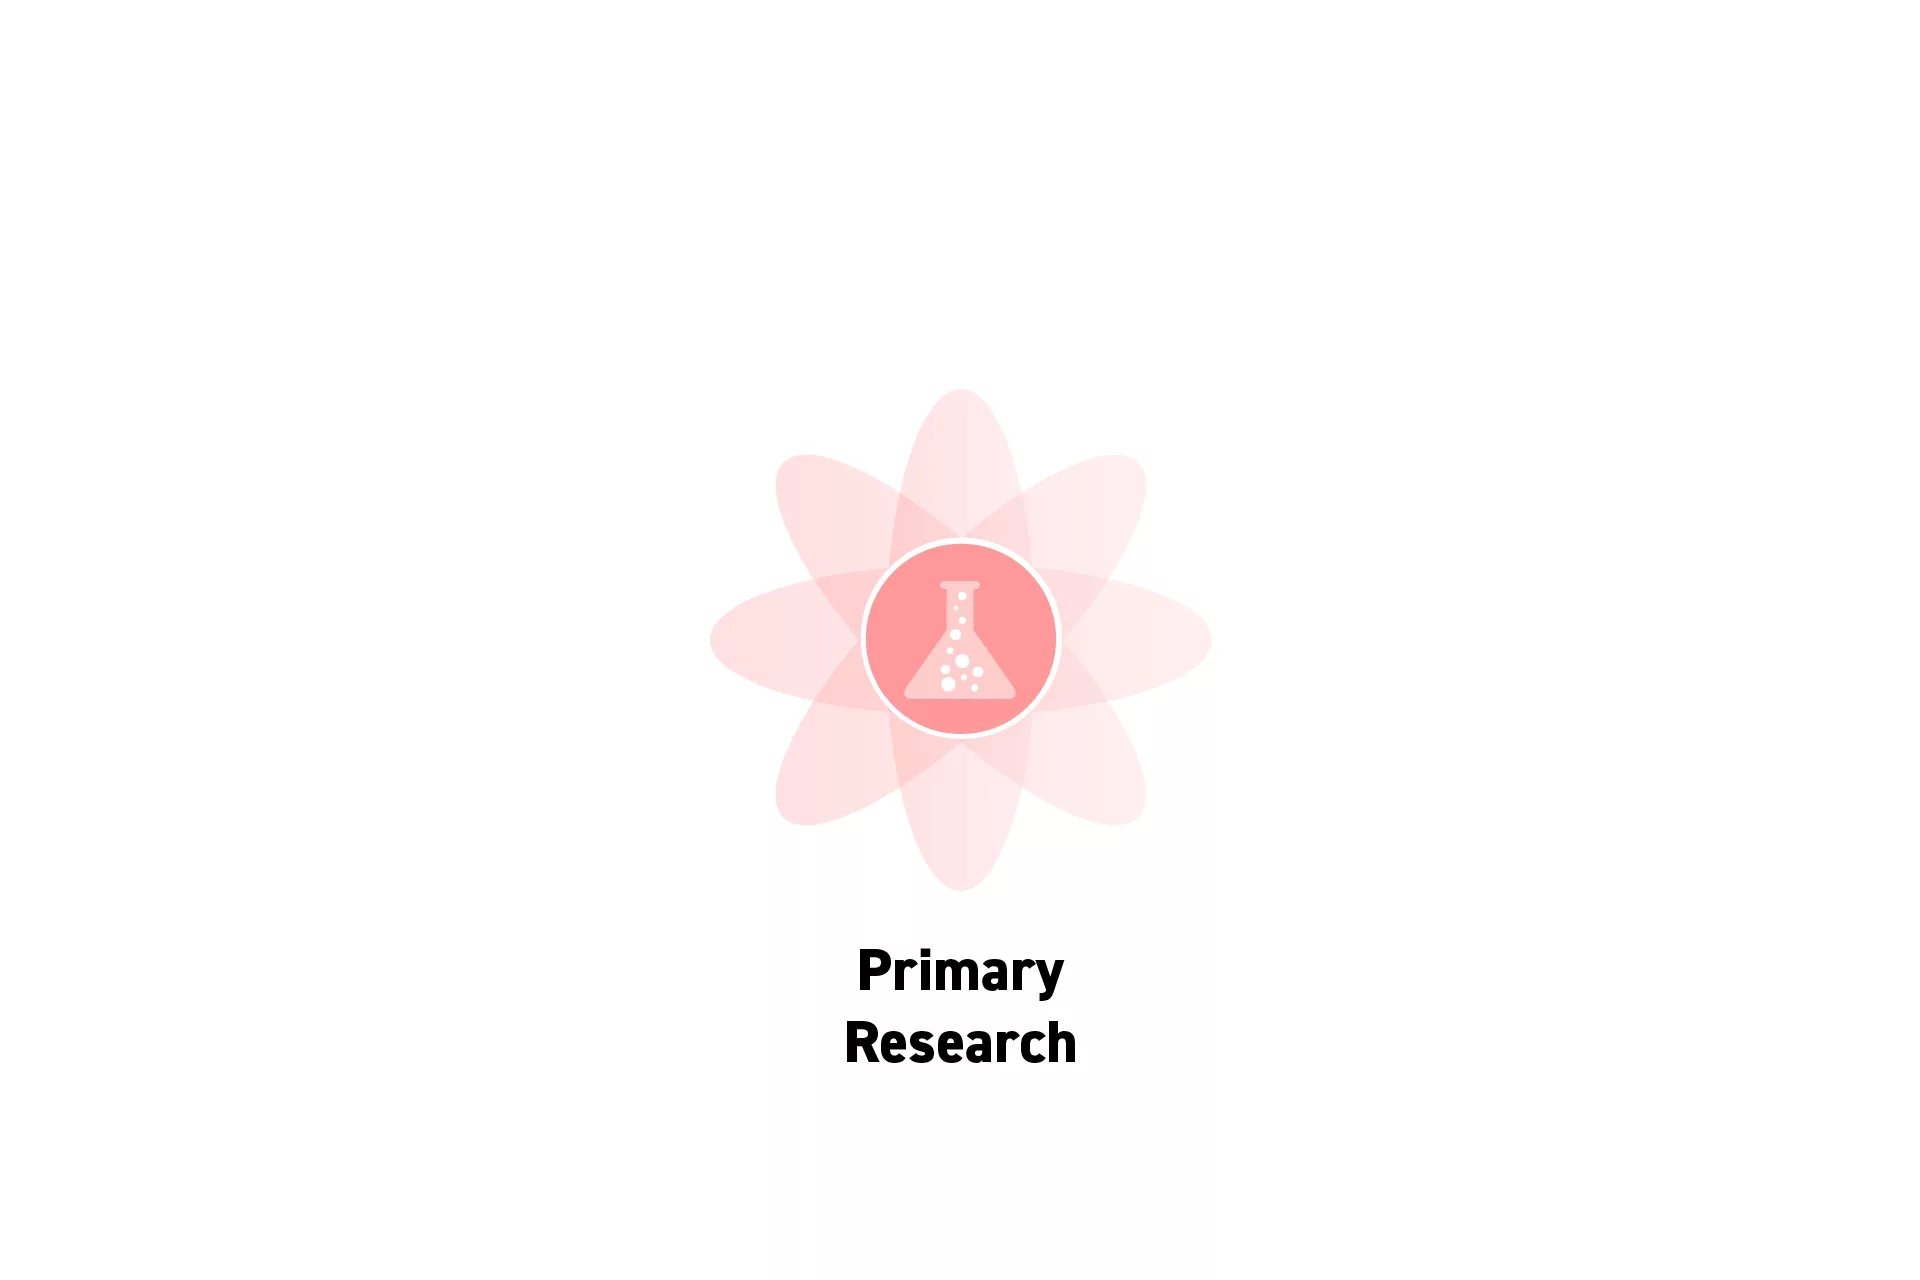 A flower that represents Strategy with the text “Primary Research” beneath it.